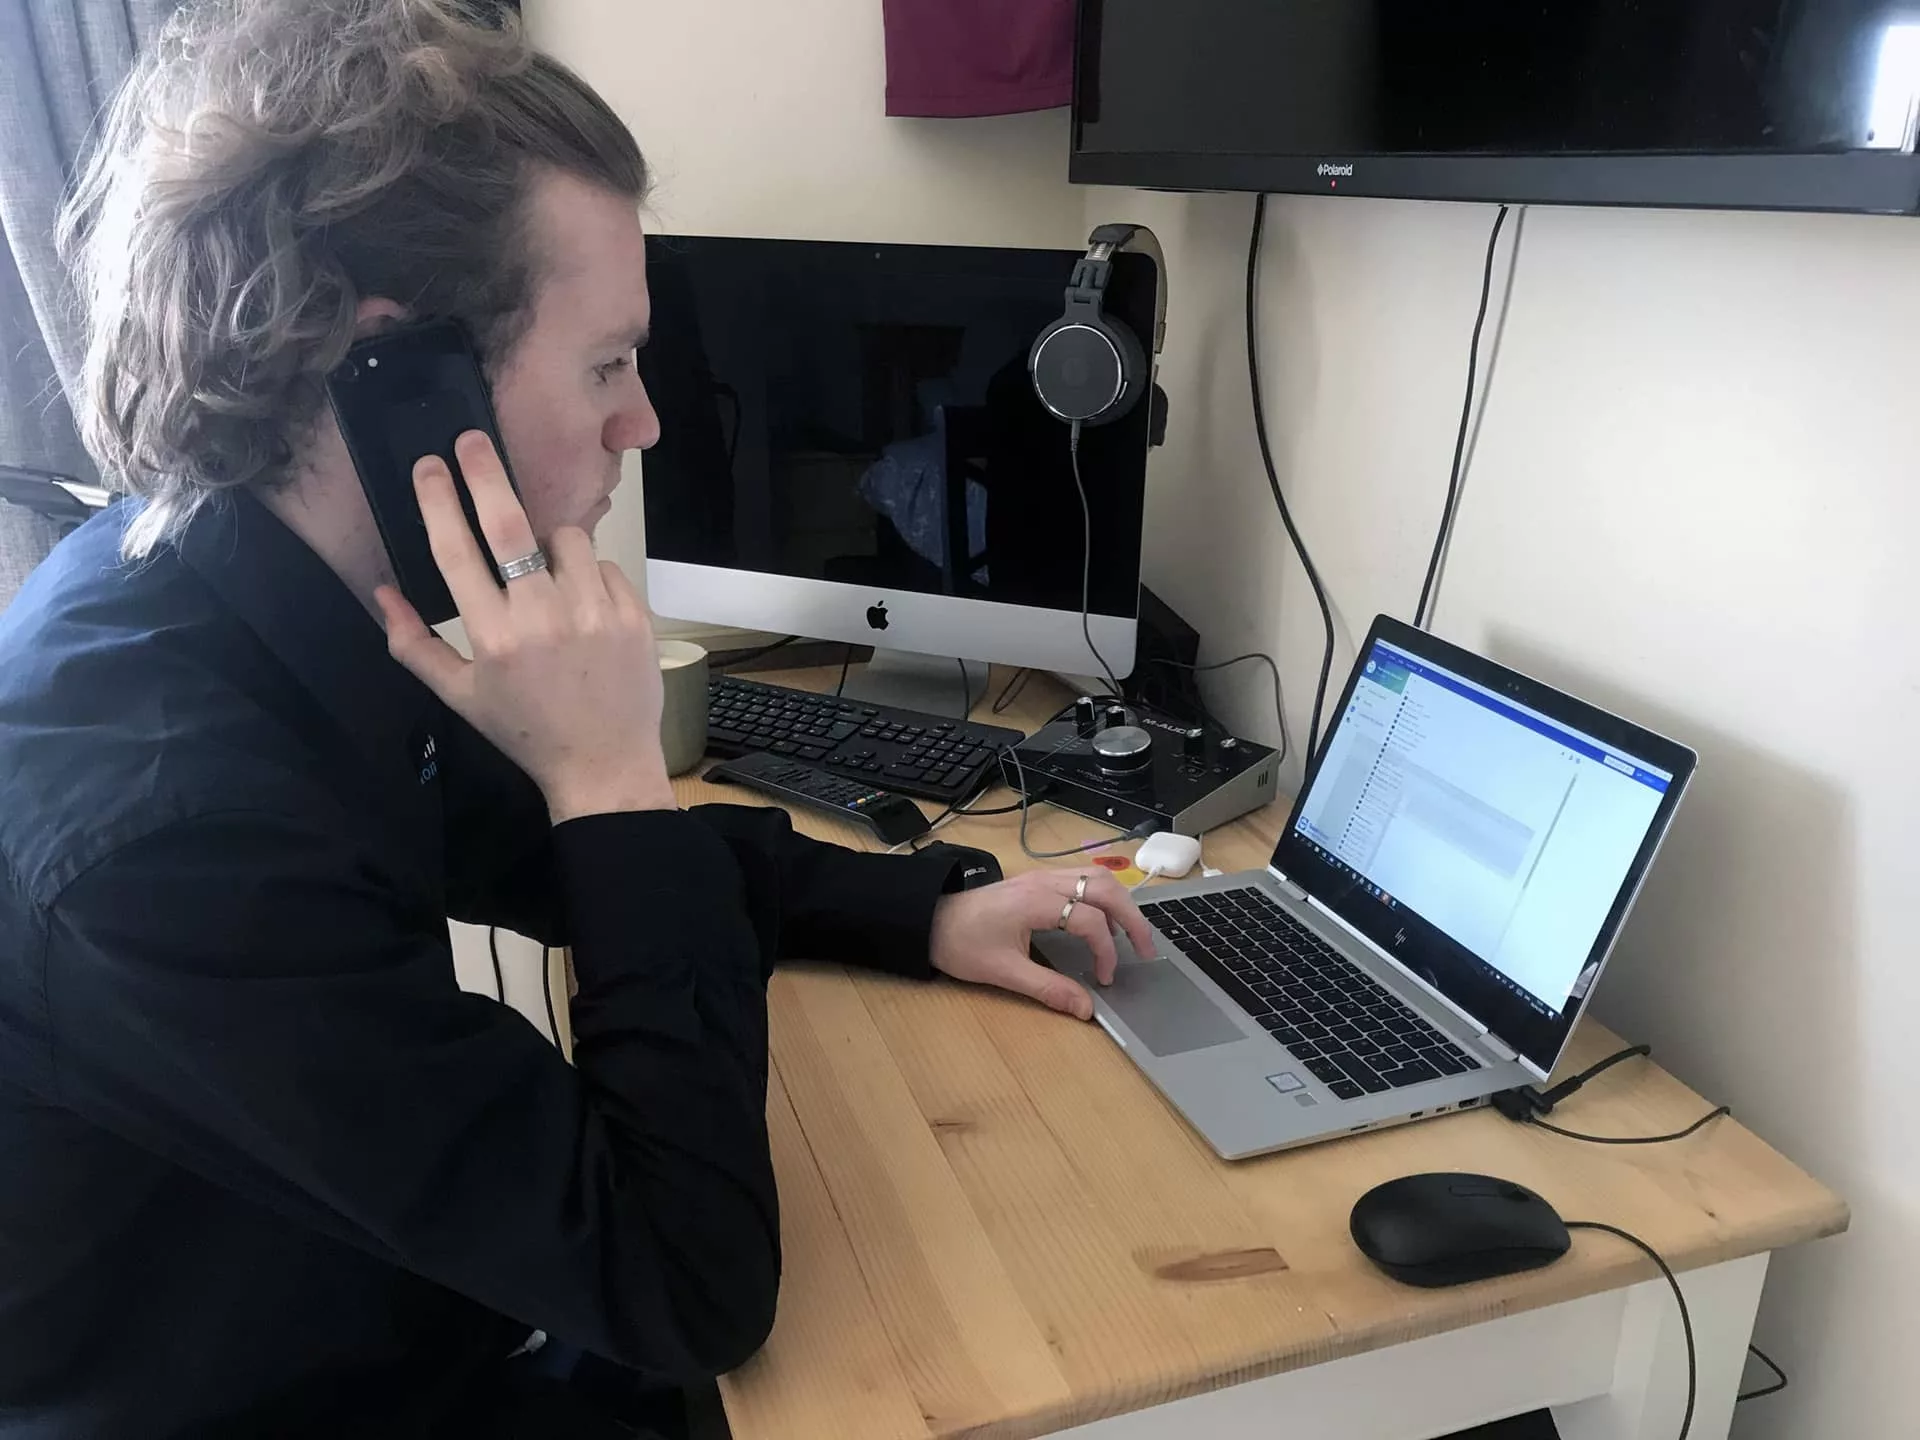 The apprentice keeping MK schools connected